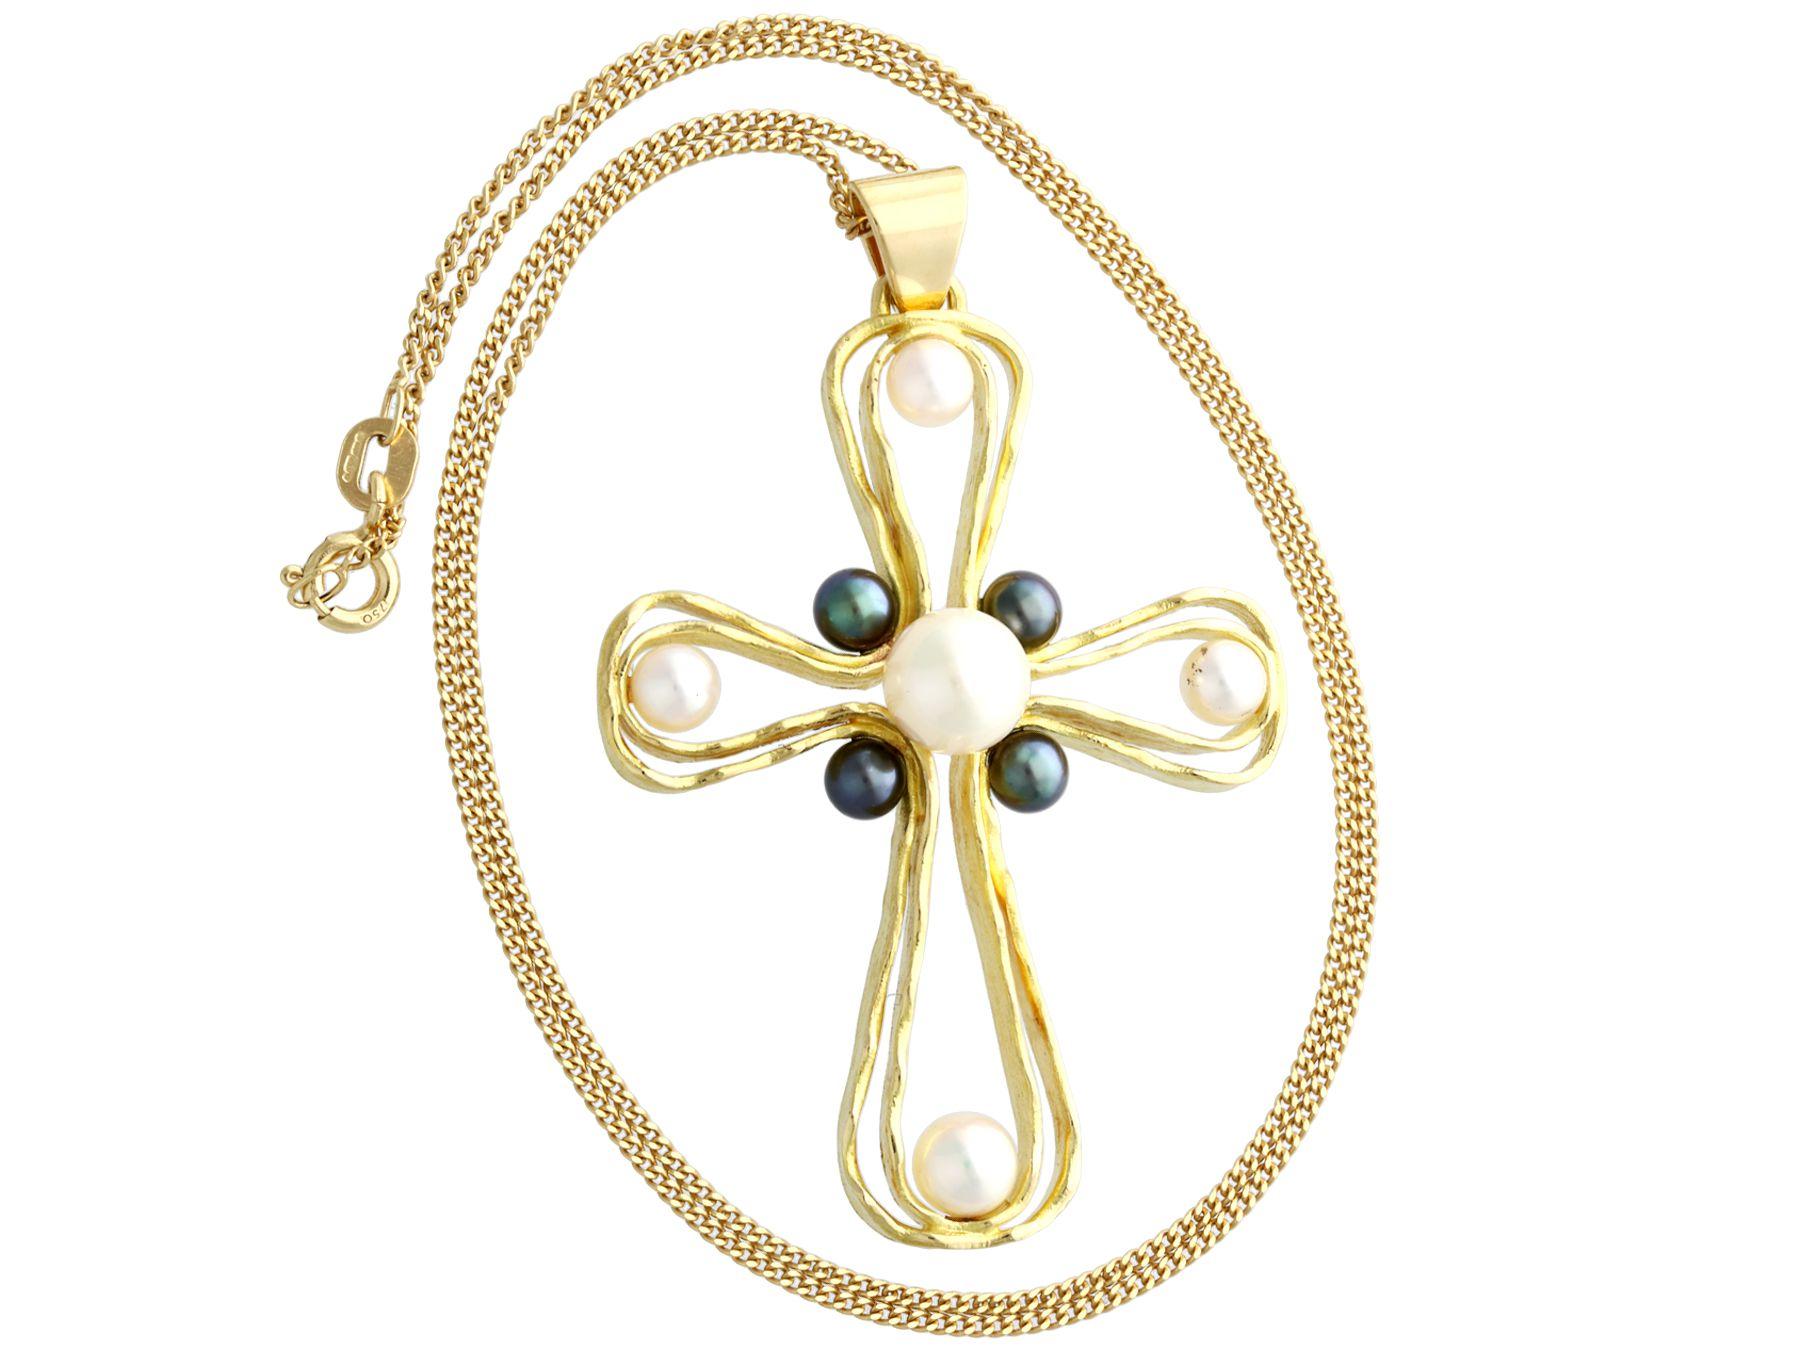 A fine and impressive vintage cultured pearl and 18k yellow gold cross pendant; part of our diverse vintage jewelry and estate jewelry collections.

This fine and impressive vintage pearl necklace has been crafted in 18k yellow gold.

A 7.5mm